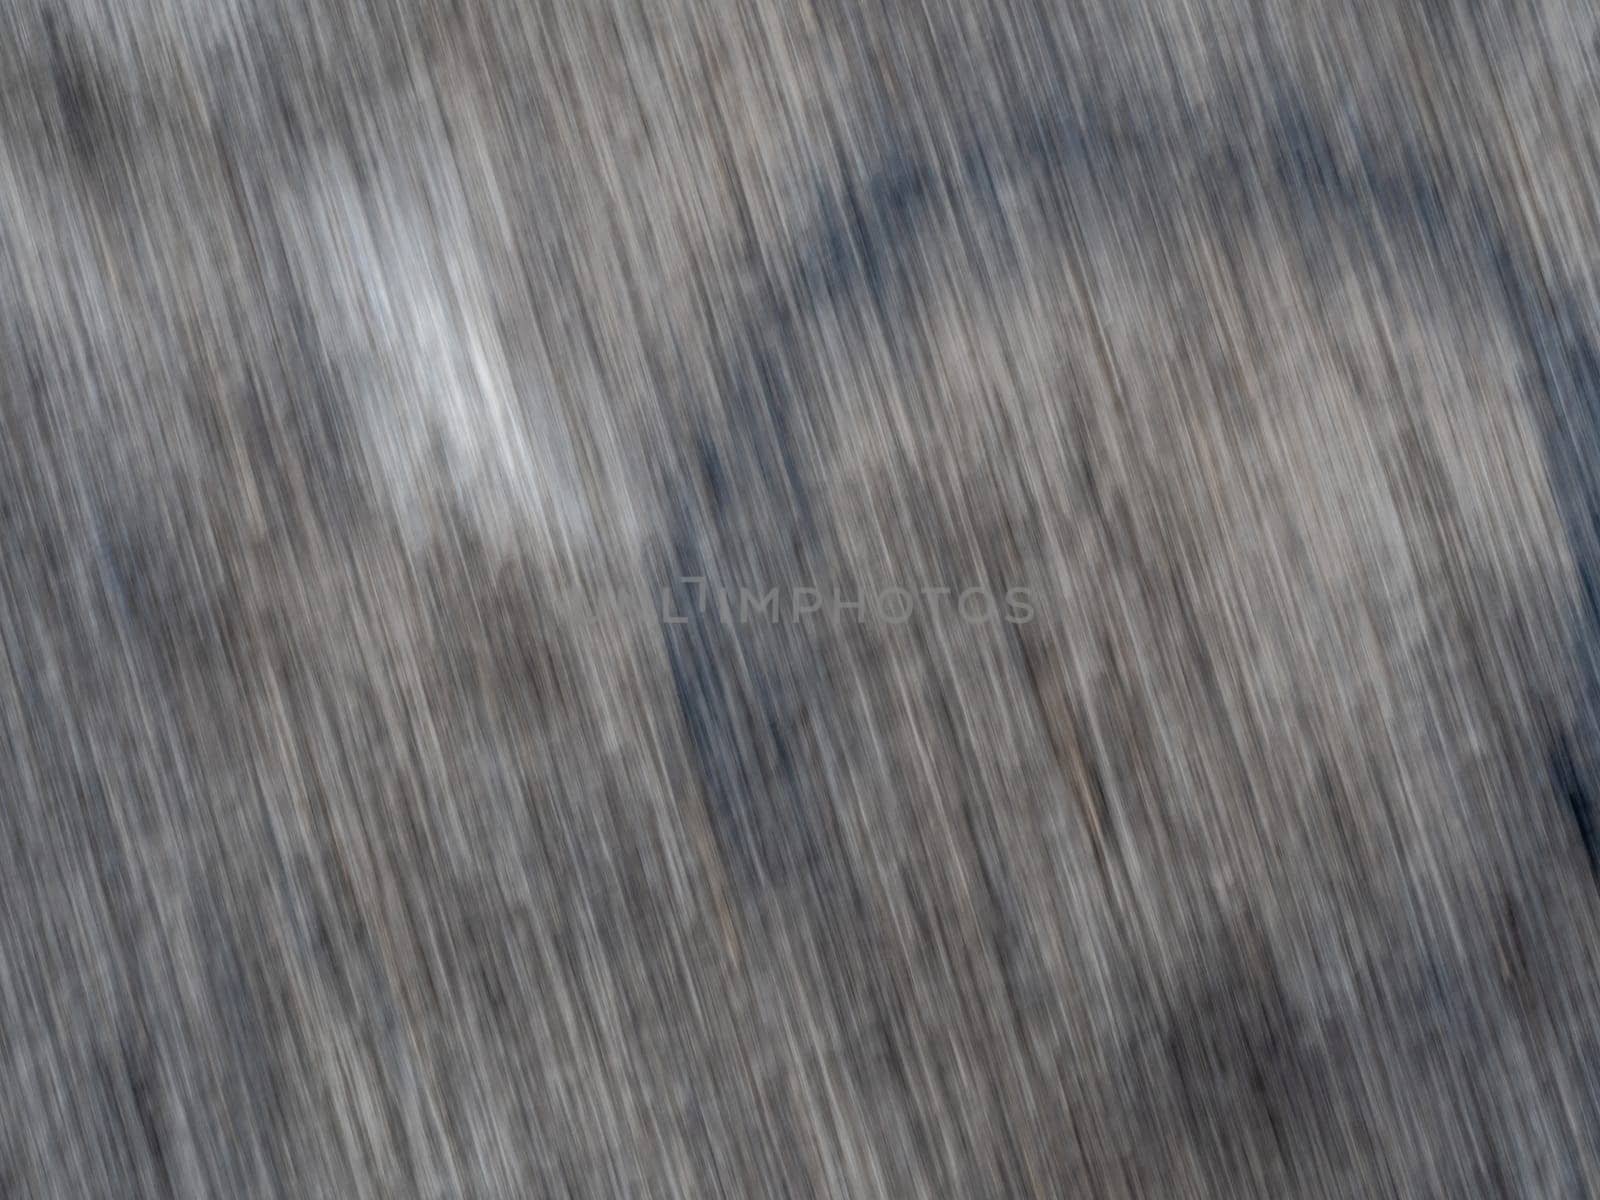 Full frame abstract texture on the rough concrete flooring by movement photography by Satakorn